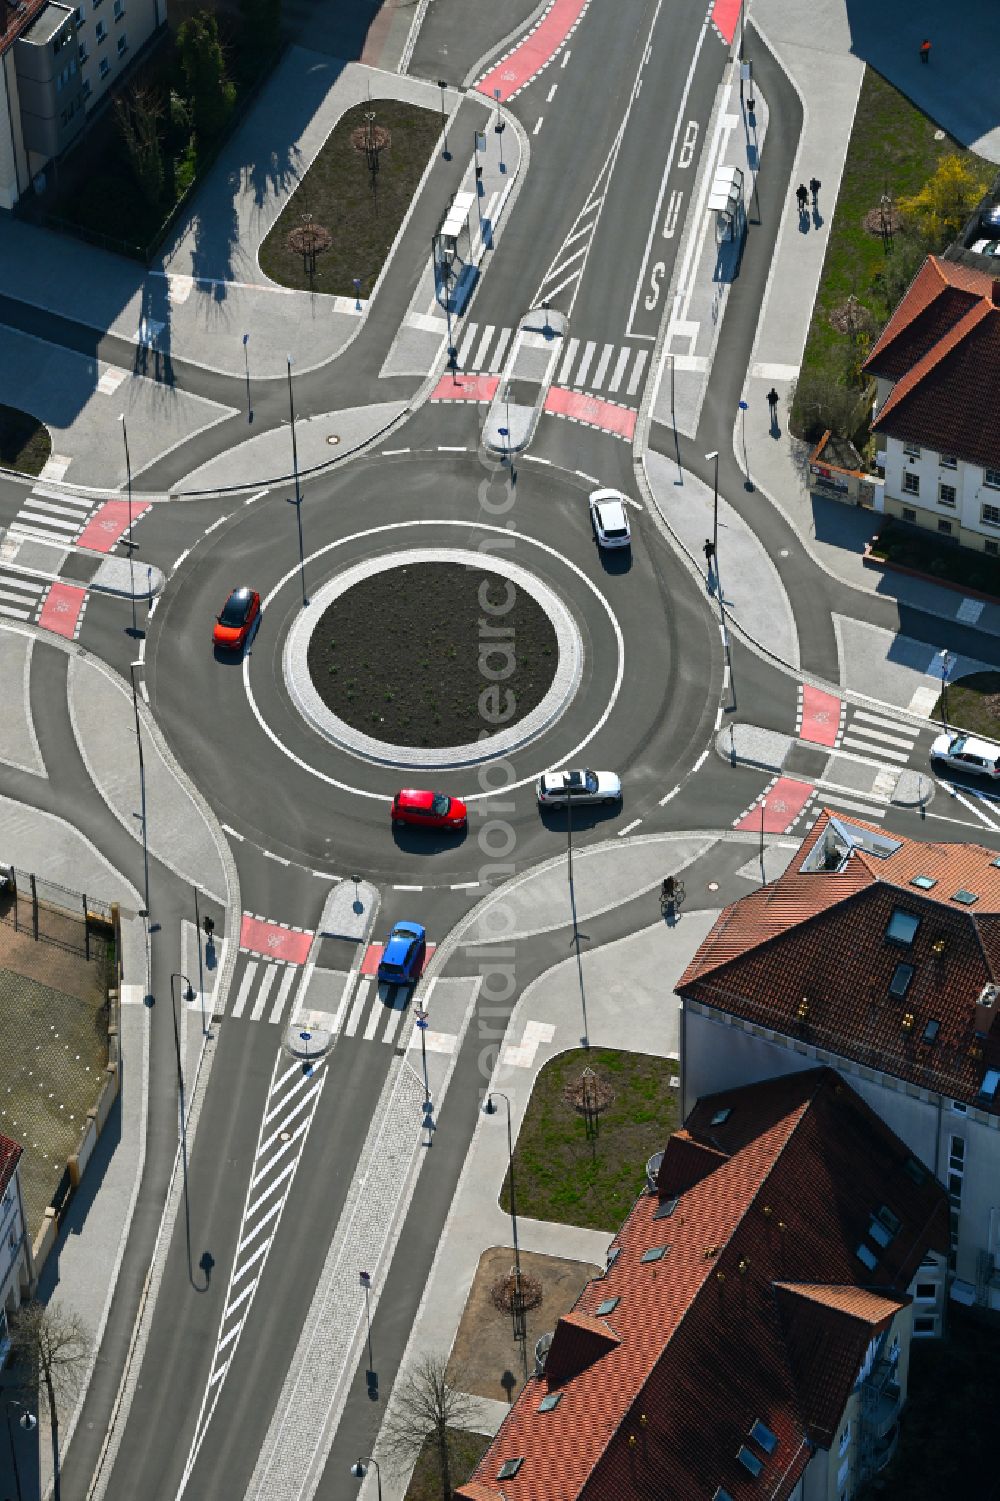 Dessau from above - Traffic management of the roundabout road Wolfgangstrasse - Albrechtplatz - Albrechtstrasse - Kurt-Weill-Strasse in Dessau in the state Saxony-Anhalt, Germany